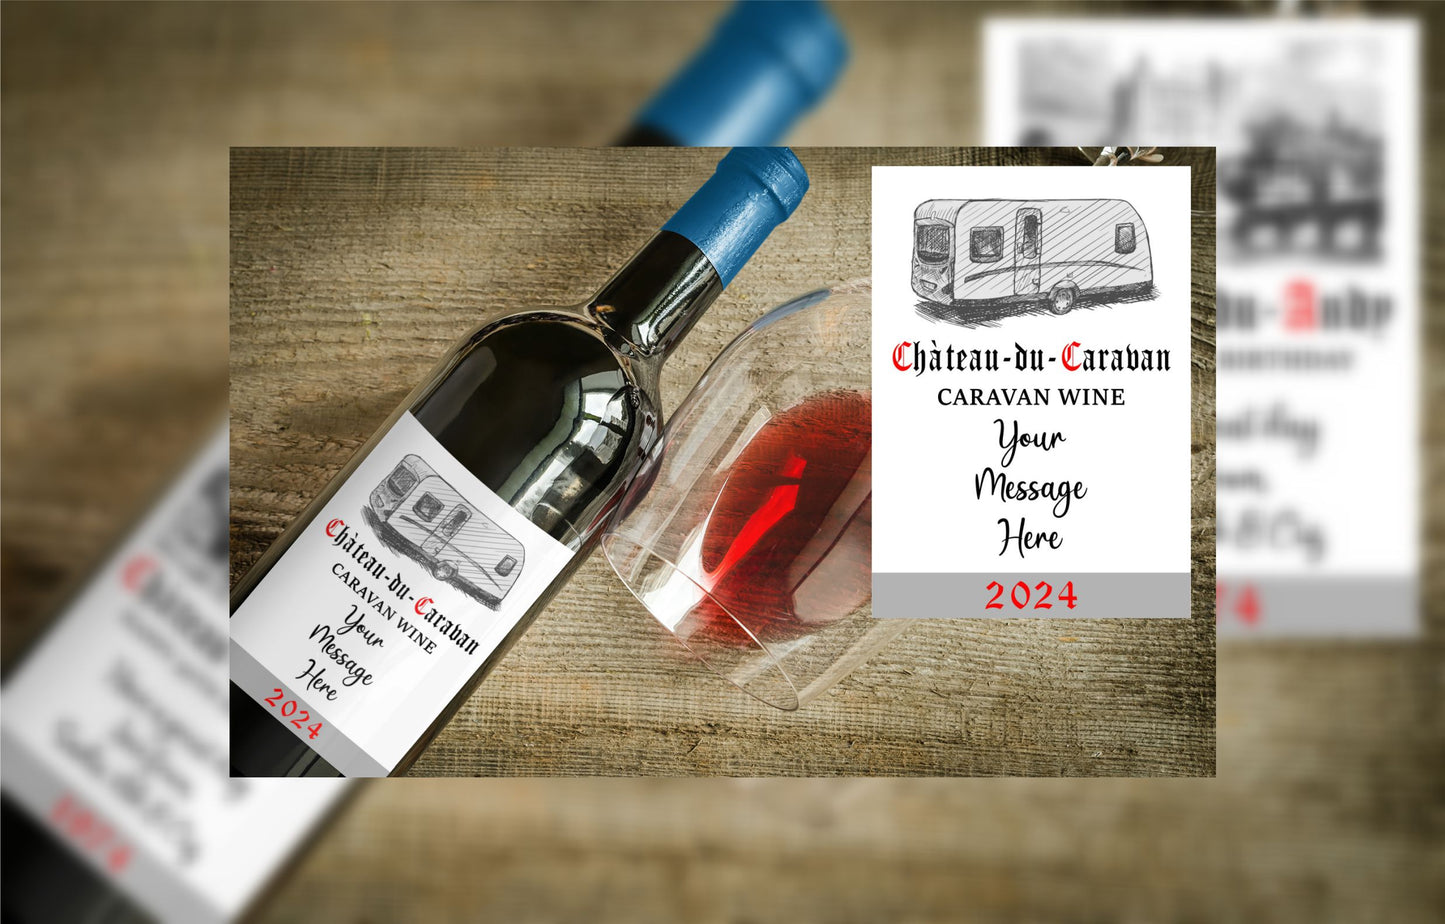 Caravan Wine Bottle Label x2 - Chateau du Caravan - Personalise Year and Message - To fit Most Alcohol Bottles Custom Gift